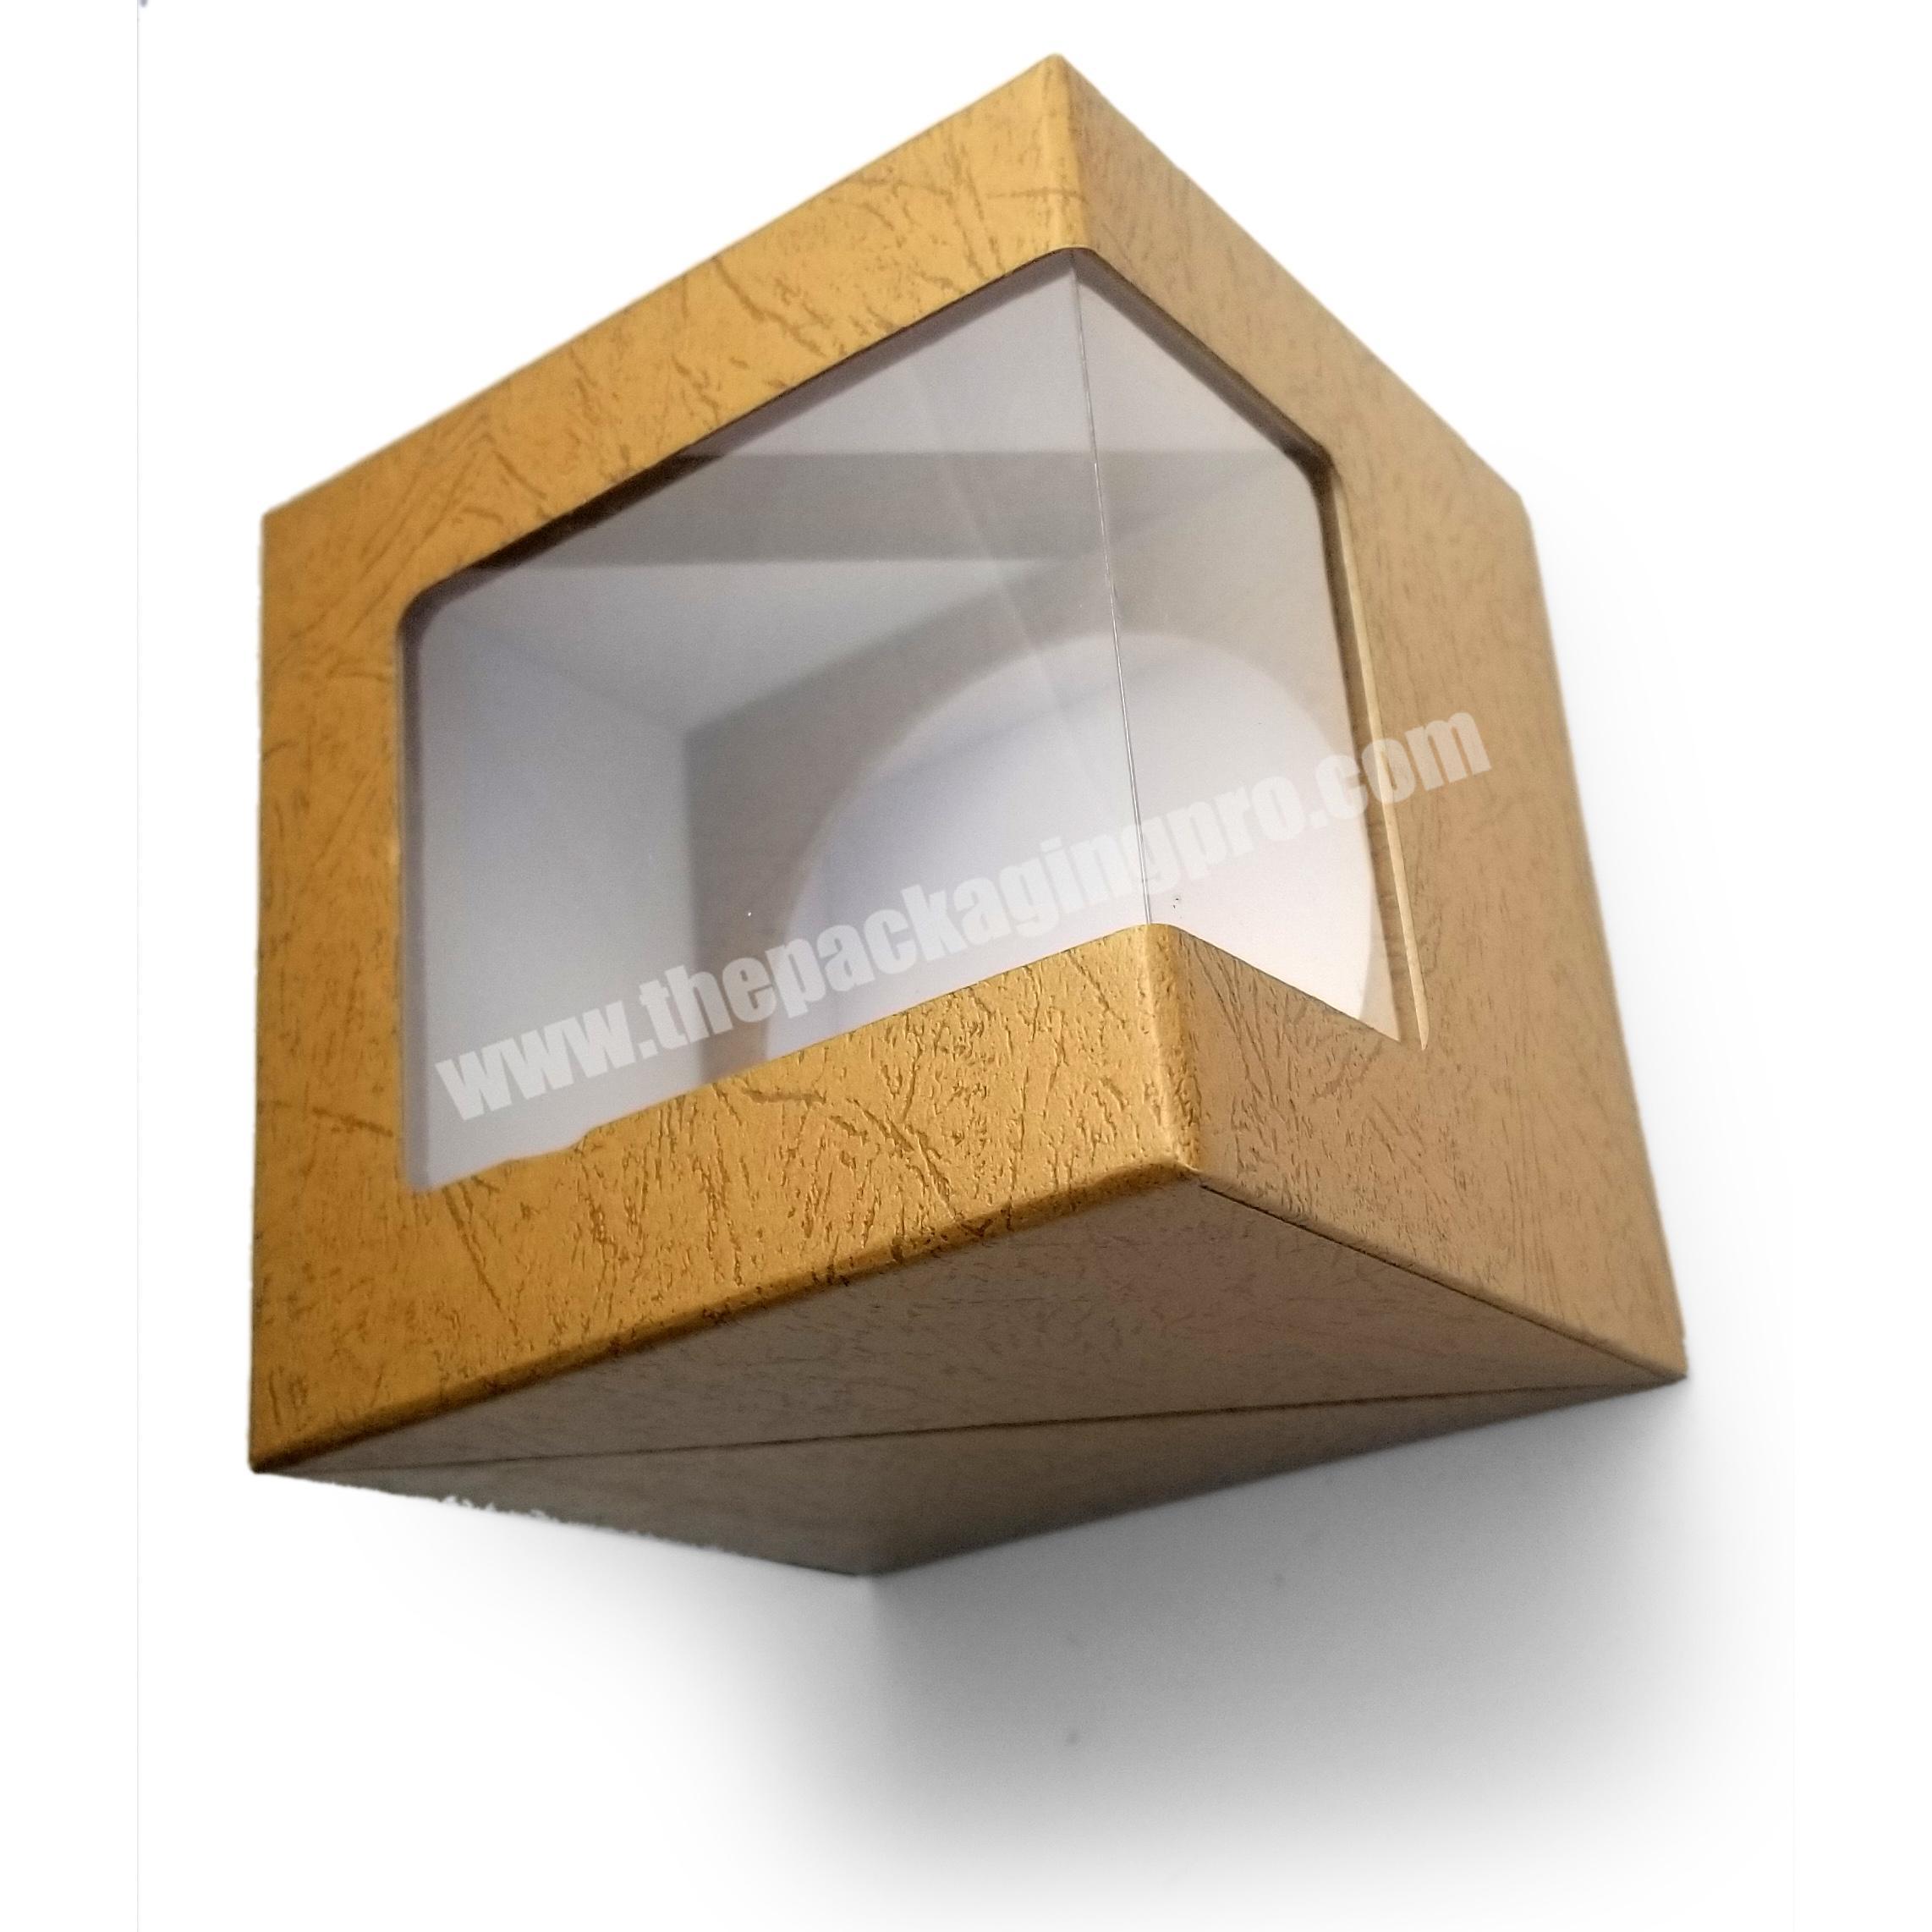 Hinged gift box in embossed texture paper with PVC window